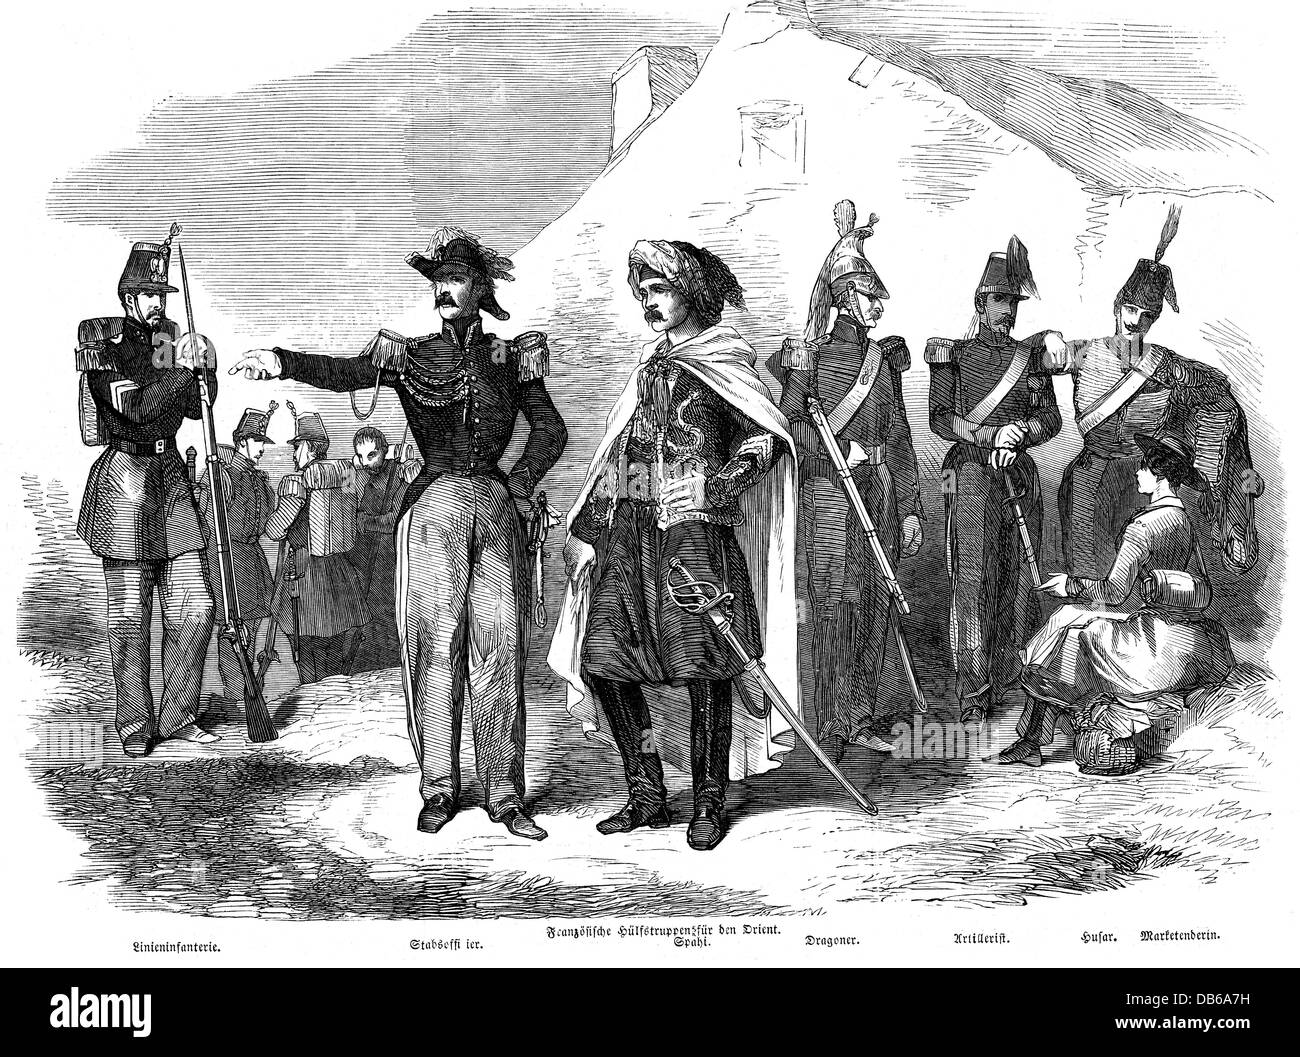 military, France, soldiers, French auxiliary forces for the Orient, wood engraving, 19th century, Oriental Crisis, line infantry, infantryman, infantrymen, staff officer, field officer, field-grade officer, staff officers, field officers, field-grade officers, officers, officer, spa, Spahis, Sipahi, Sipahis, dragoon, artilleryman, artillerymen, hussar, hussars, sutler, victualer, sutlers, victualers, uniform, uniforms, arm, weapon, weapons, arms, rifle, gun, rifles, guns, sabre, sabres, helmets, helmet, army, armies, historic, historical, people, Additional-Rights-Clearences-Not Available Stock Photo